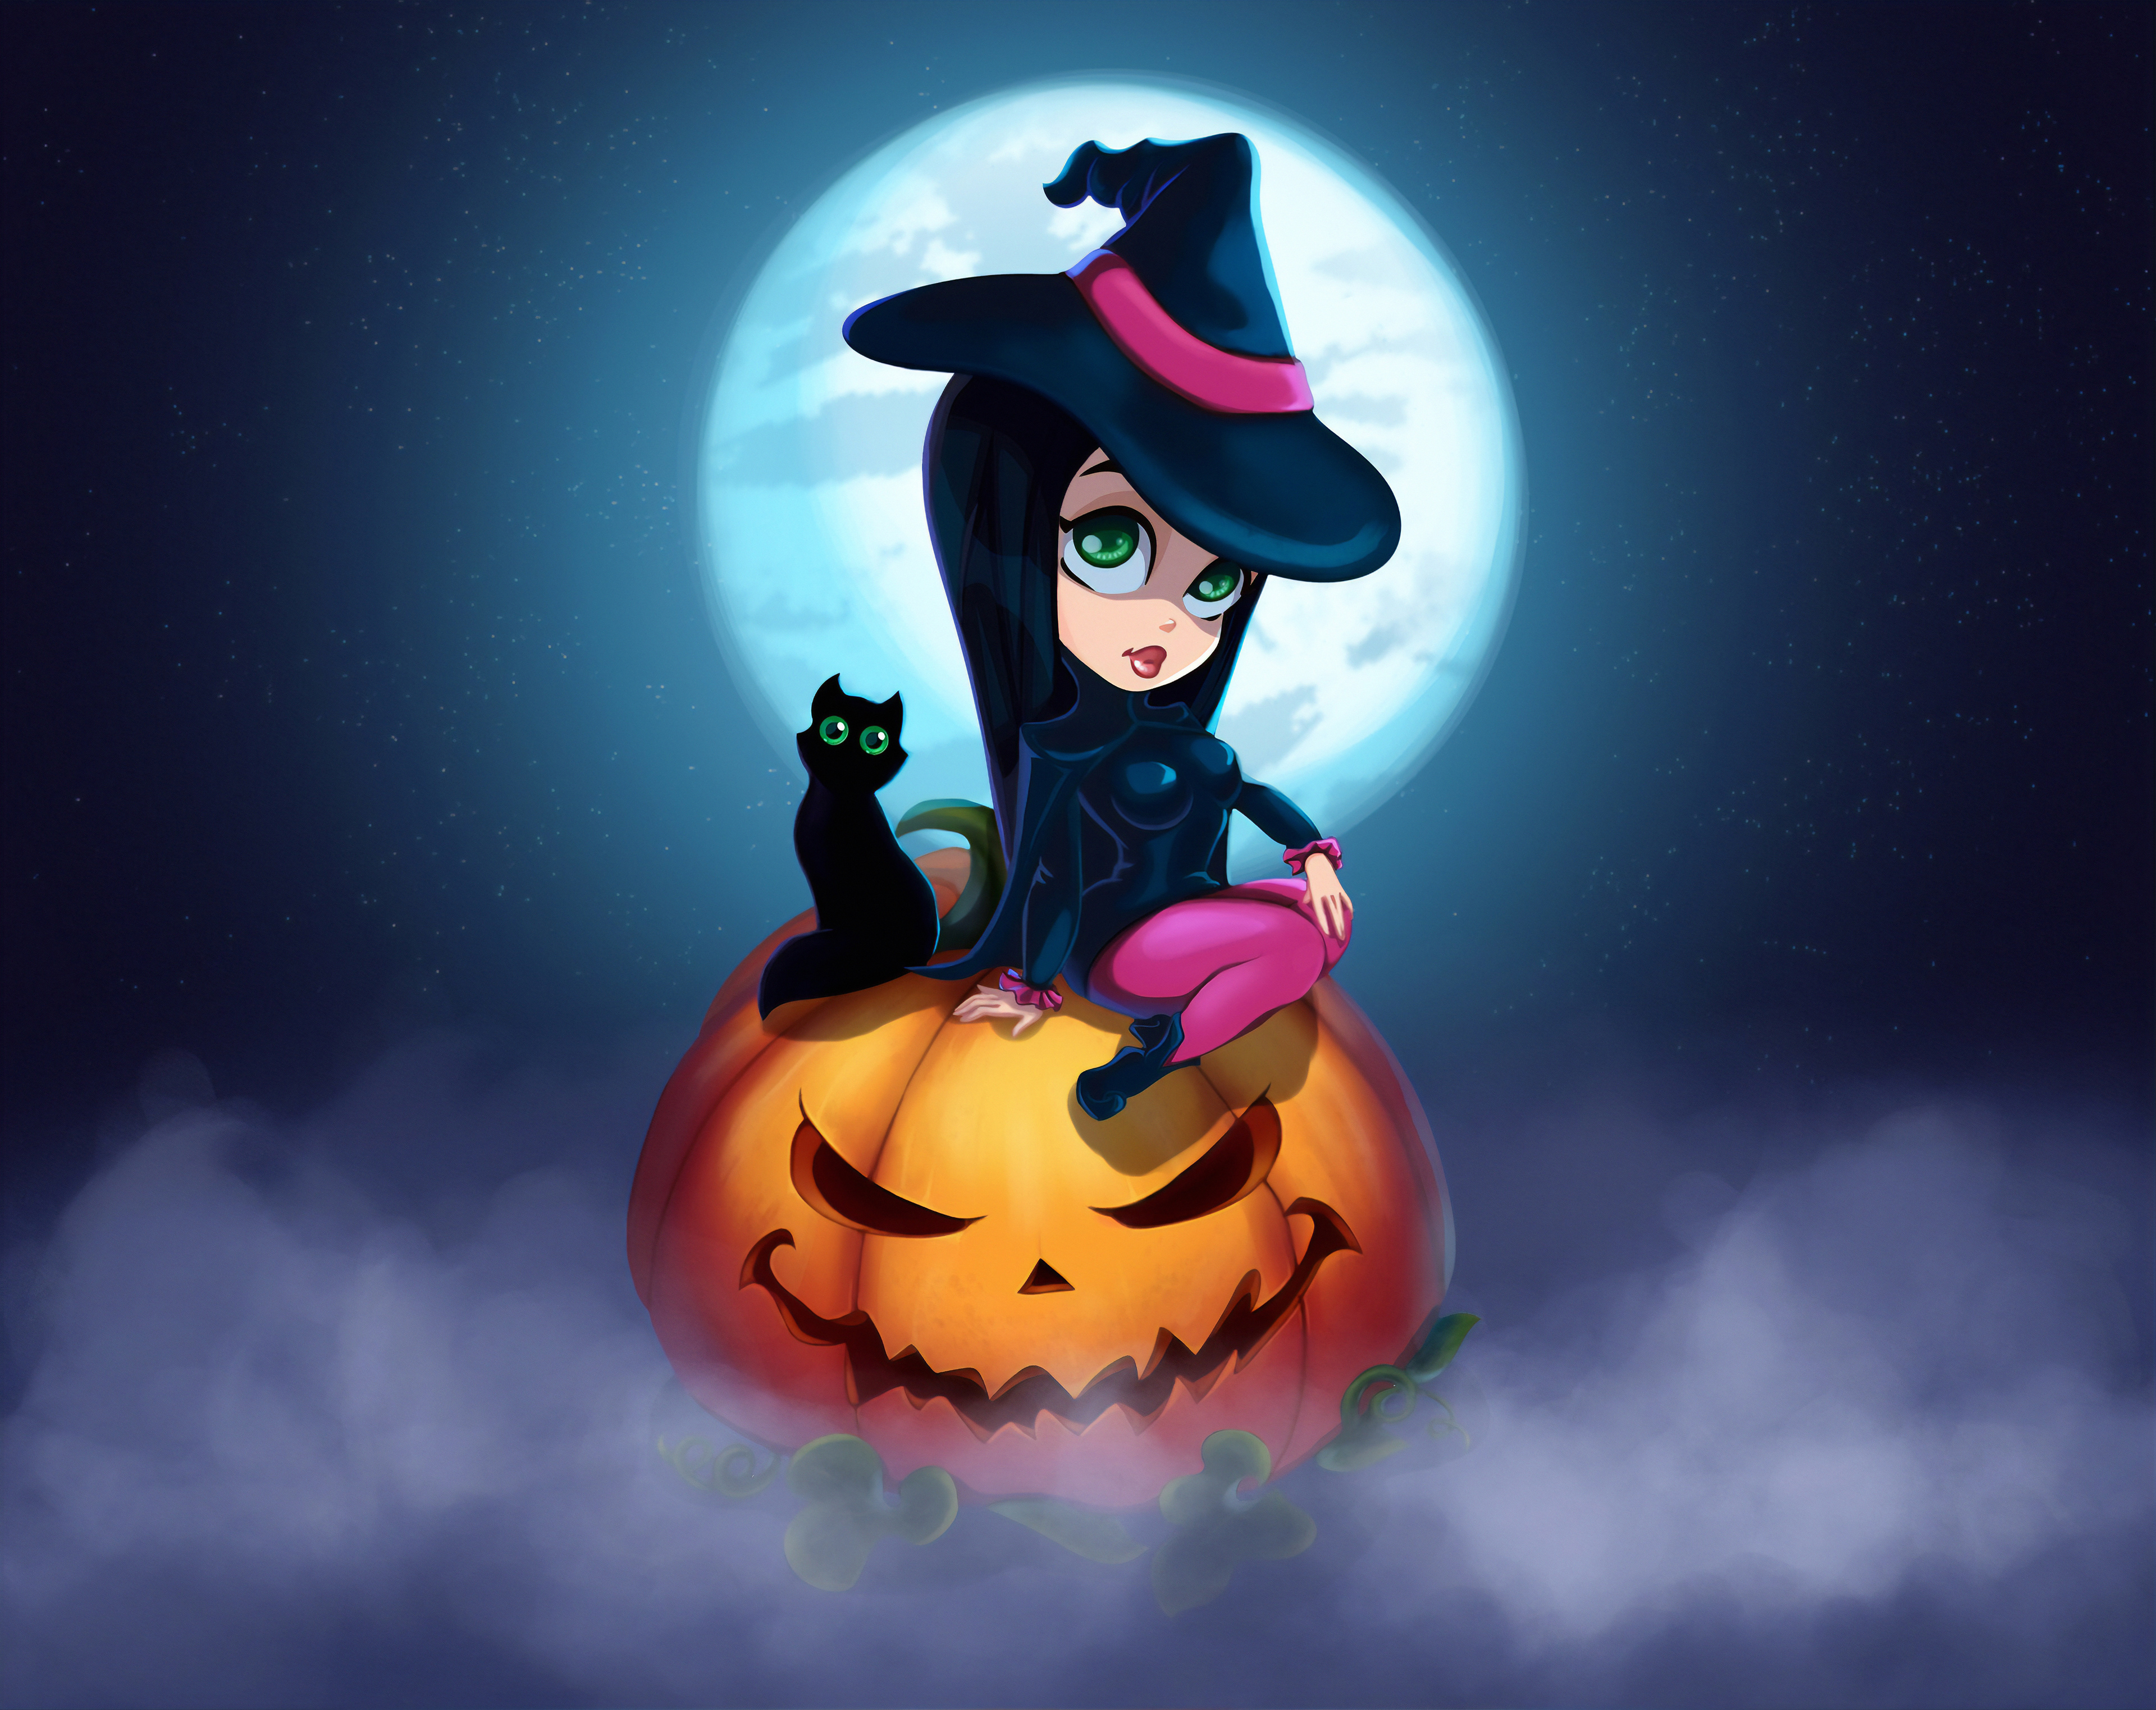 Cute girl in a hat with a black kitty sitting on a pumpkin